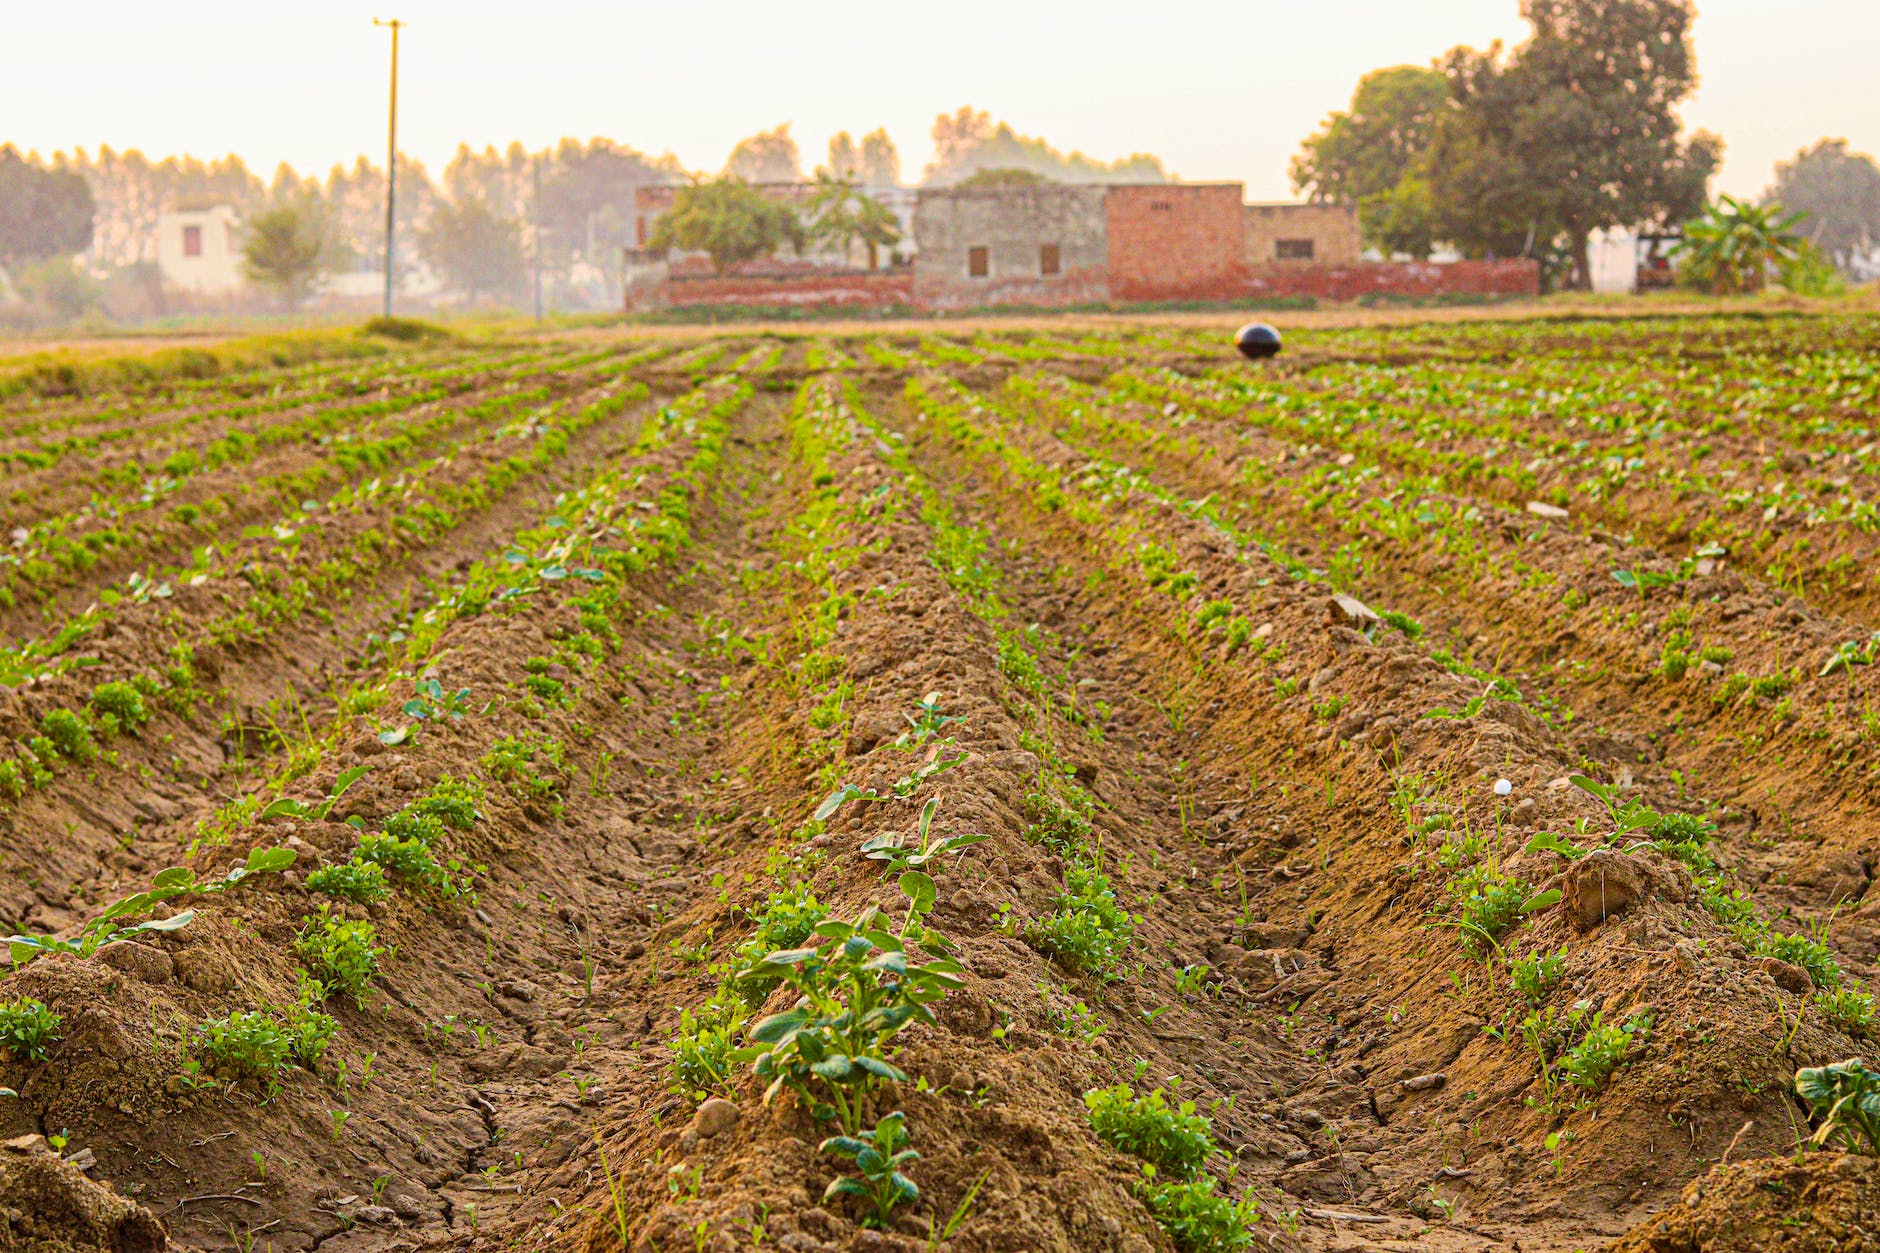 crops growing in agriculture field